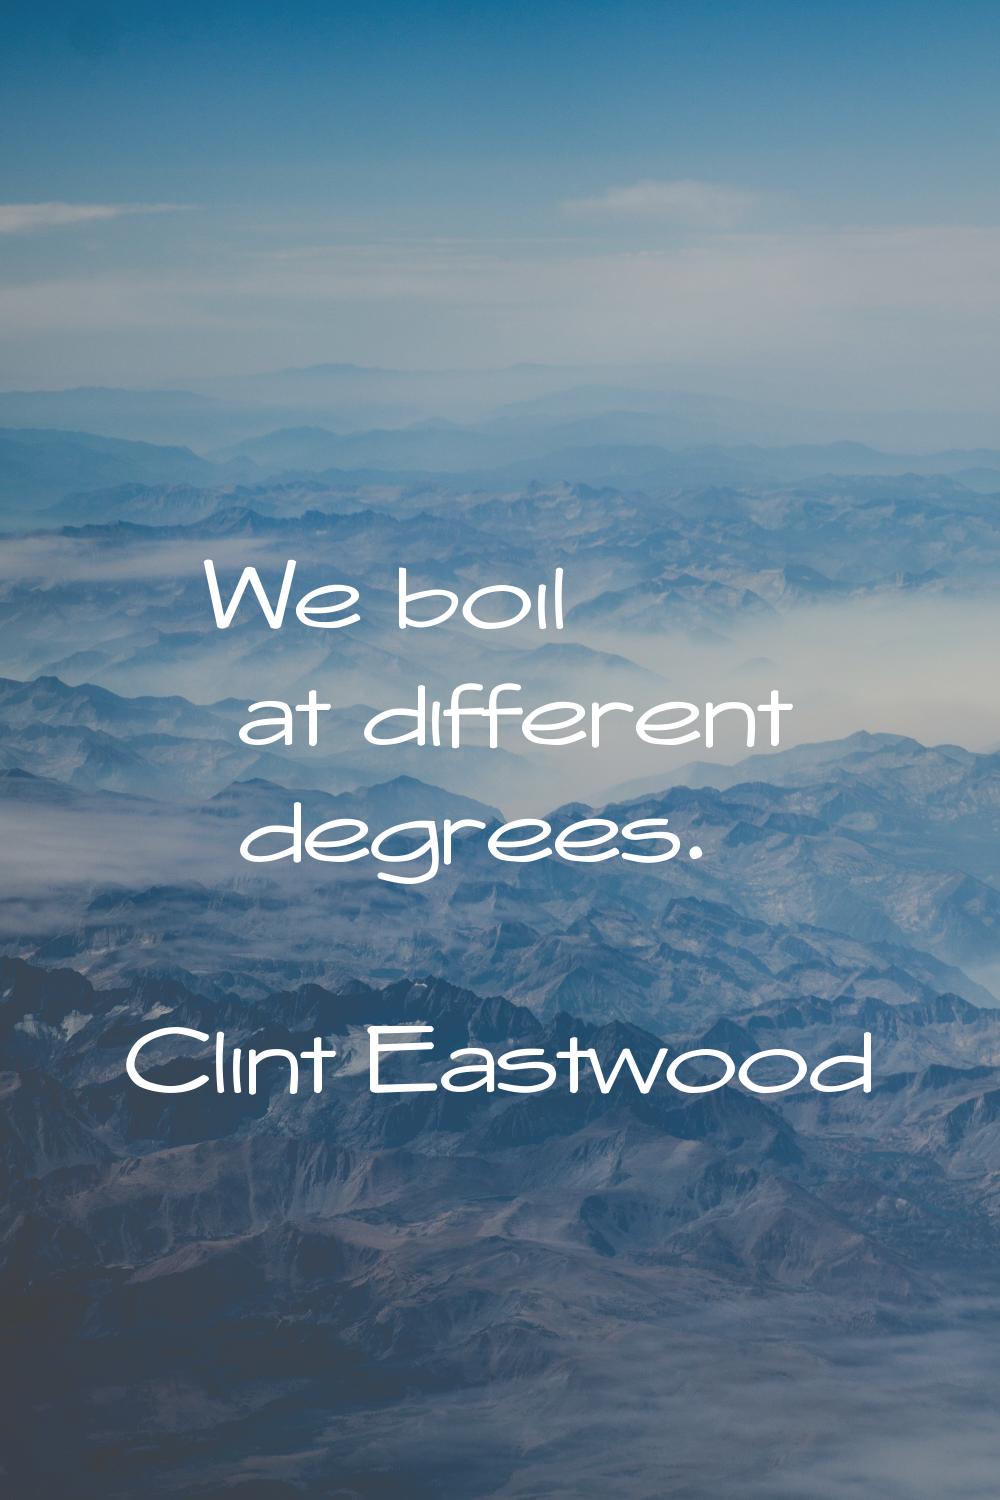 We boil at different degrees.